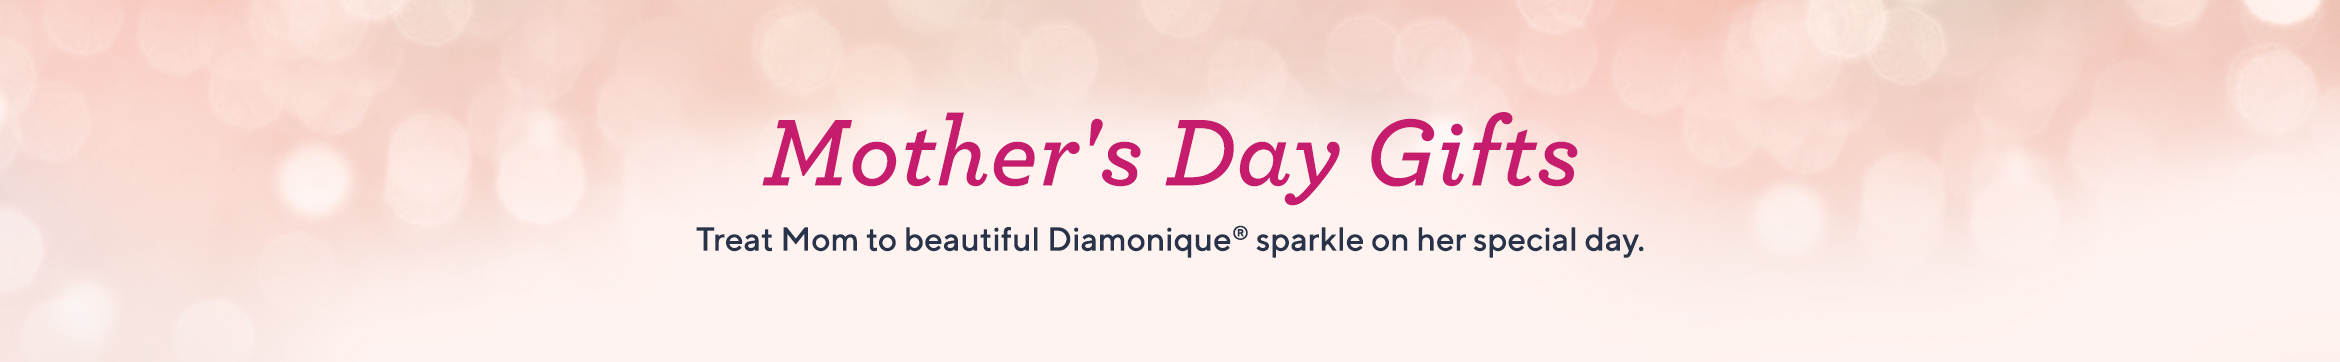 Mother's Day Gifts - Treat Mom to beautiful Diamonique® sparkle on her special day.